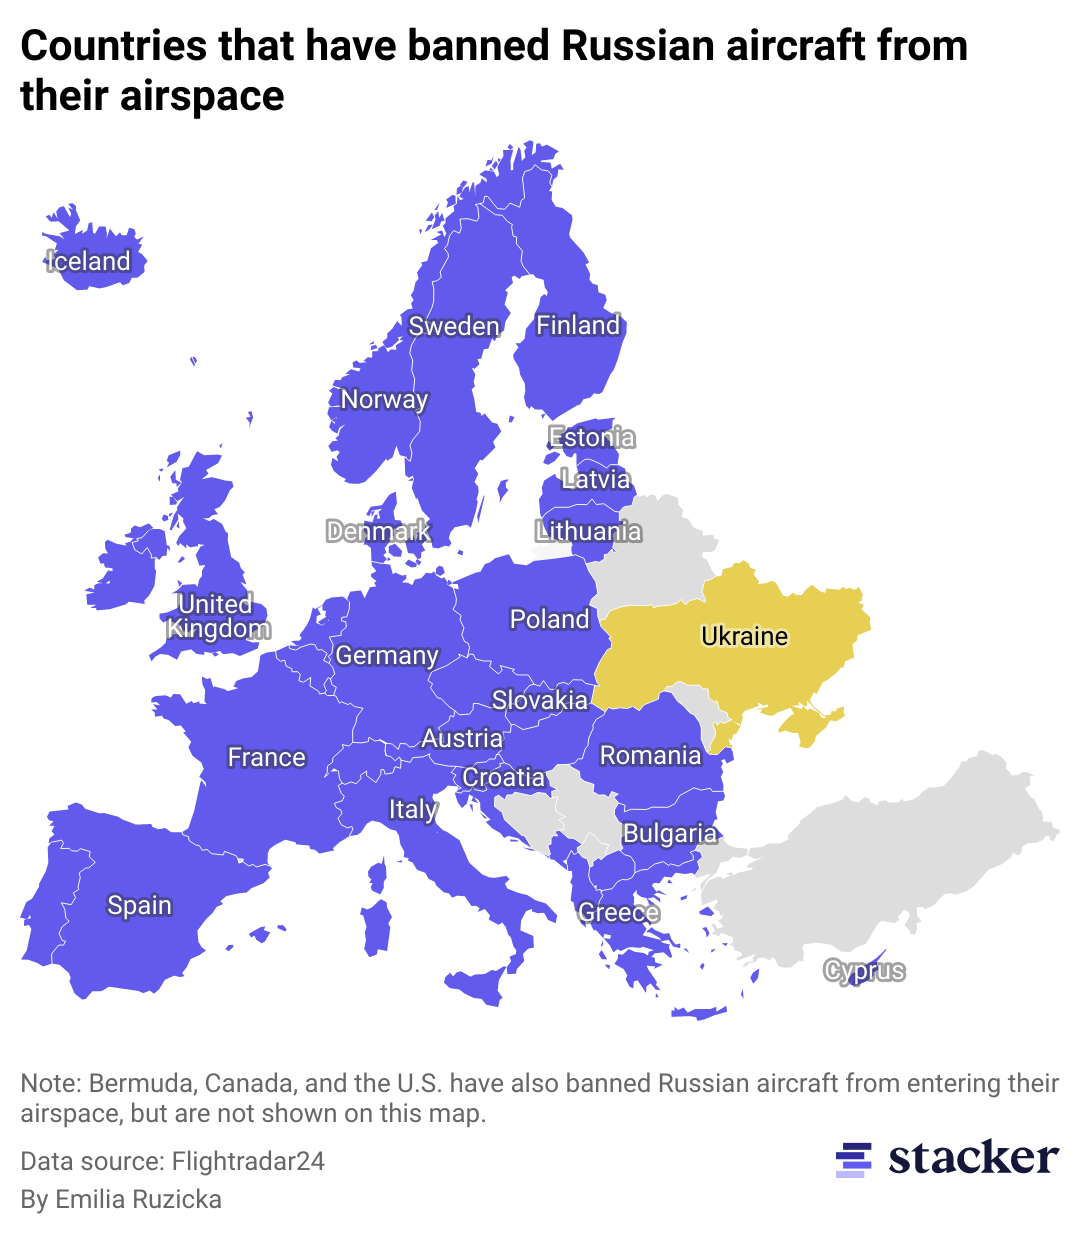 A map showing which European countries have banned Russian flights from their airspace.